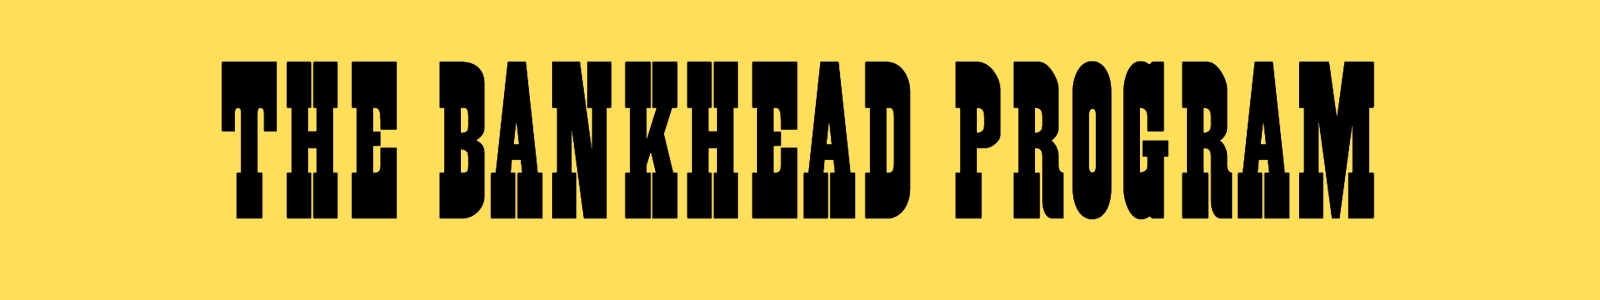 The Bankhead Program in black text on yellow background